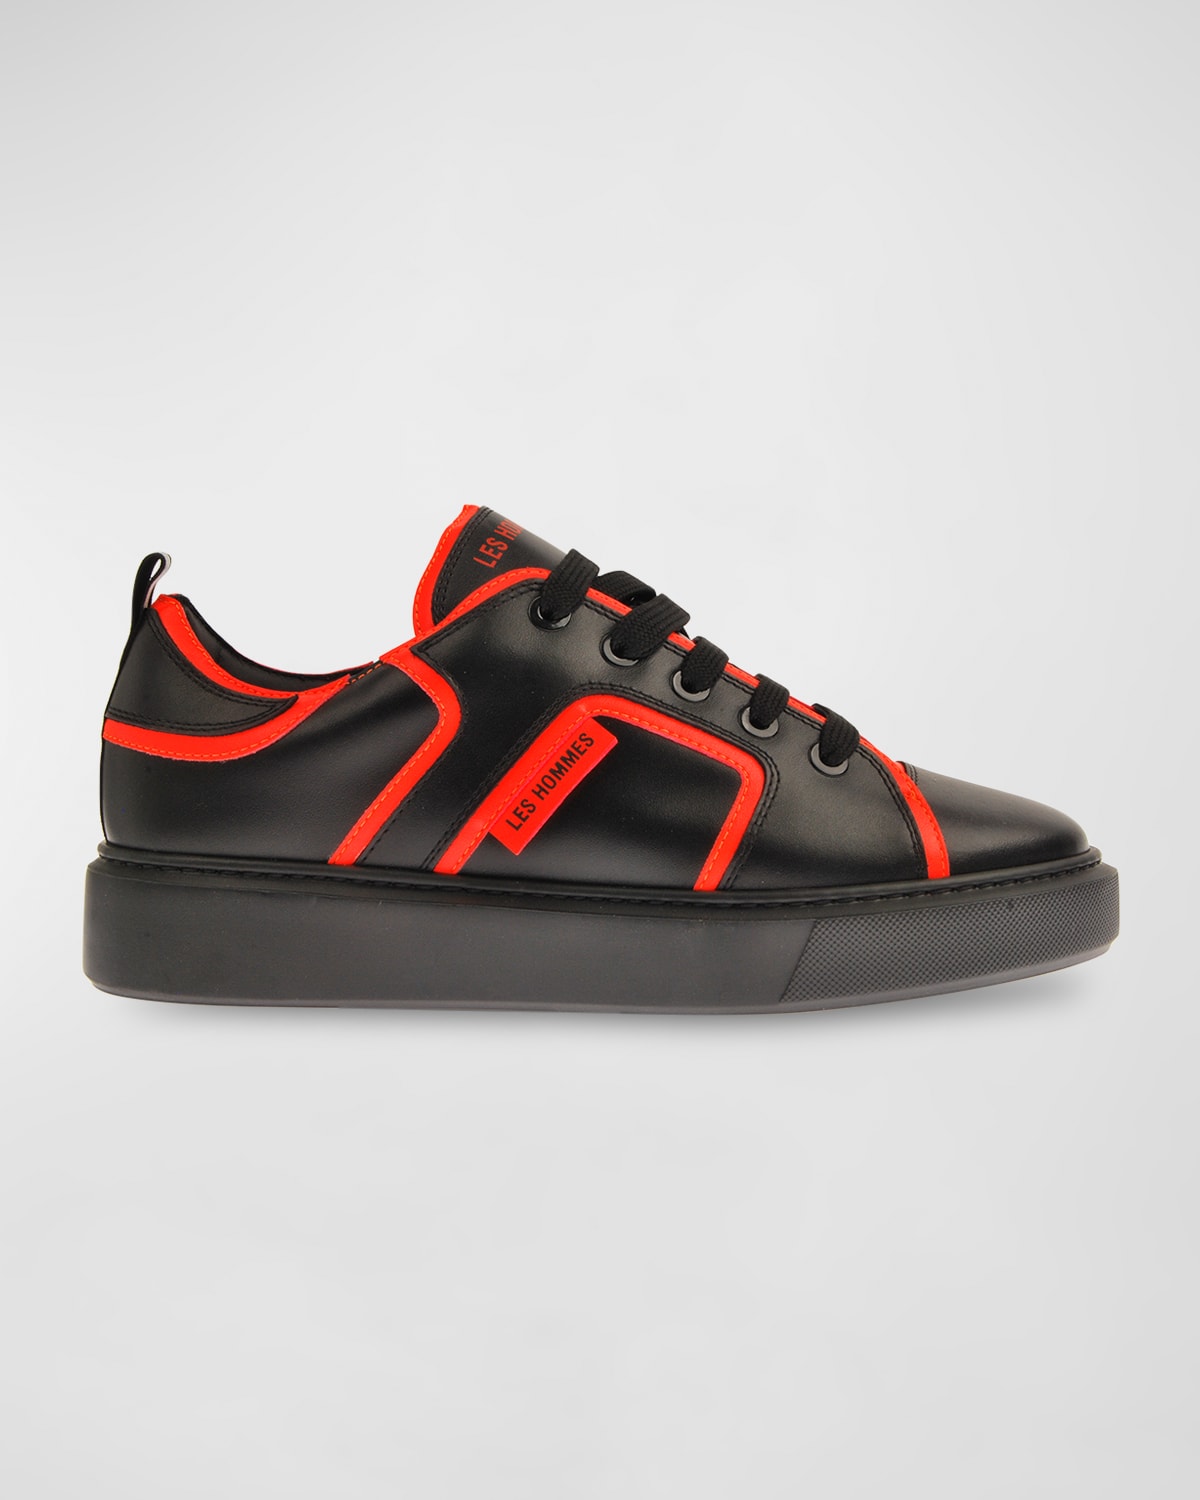 Les Hommes Sneakers In Blk/red